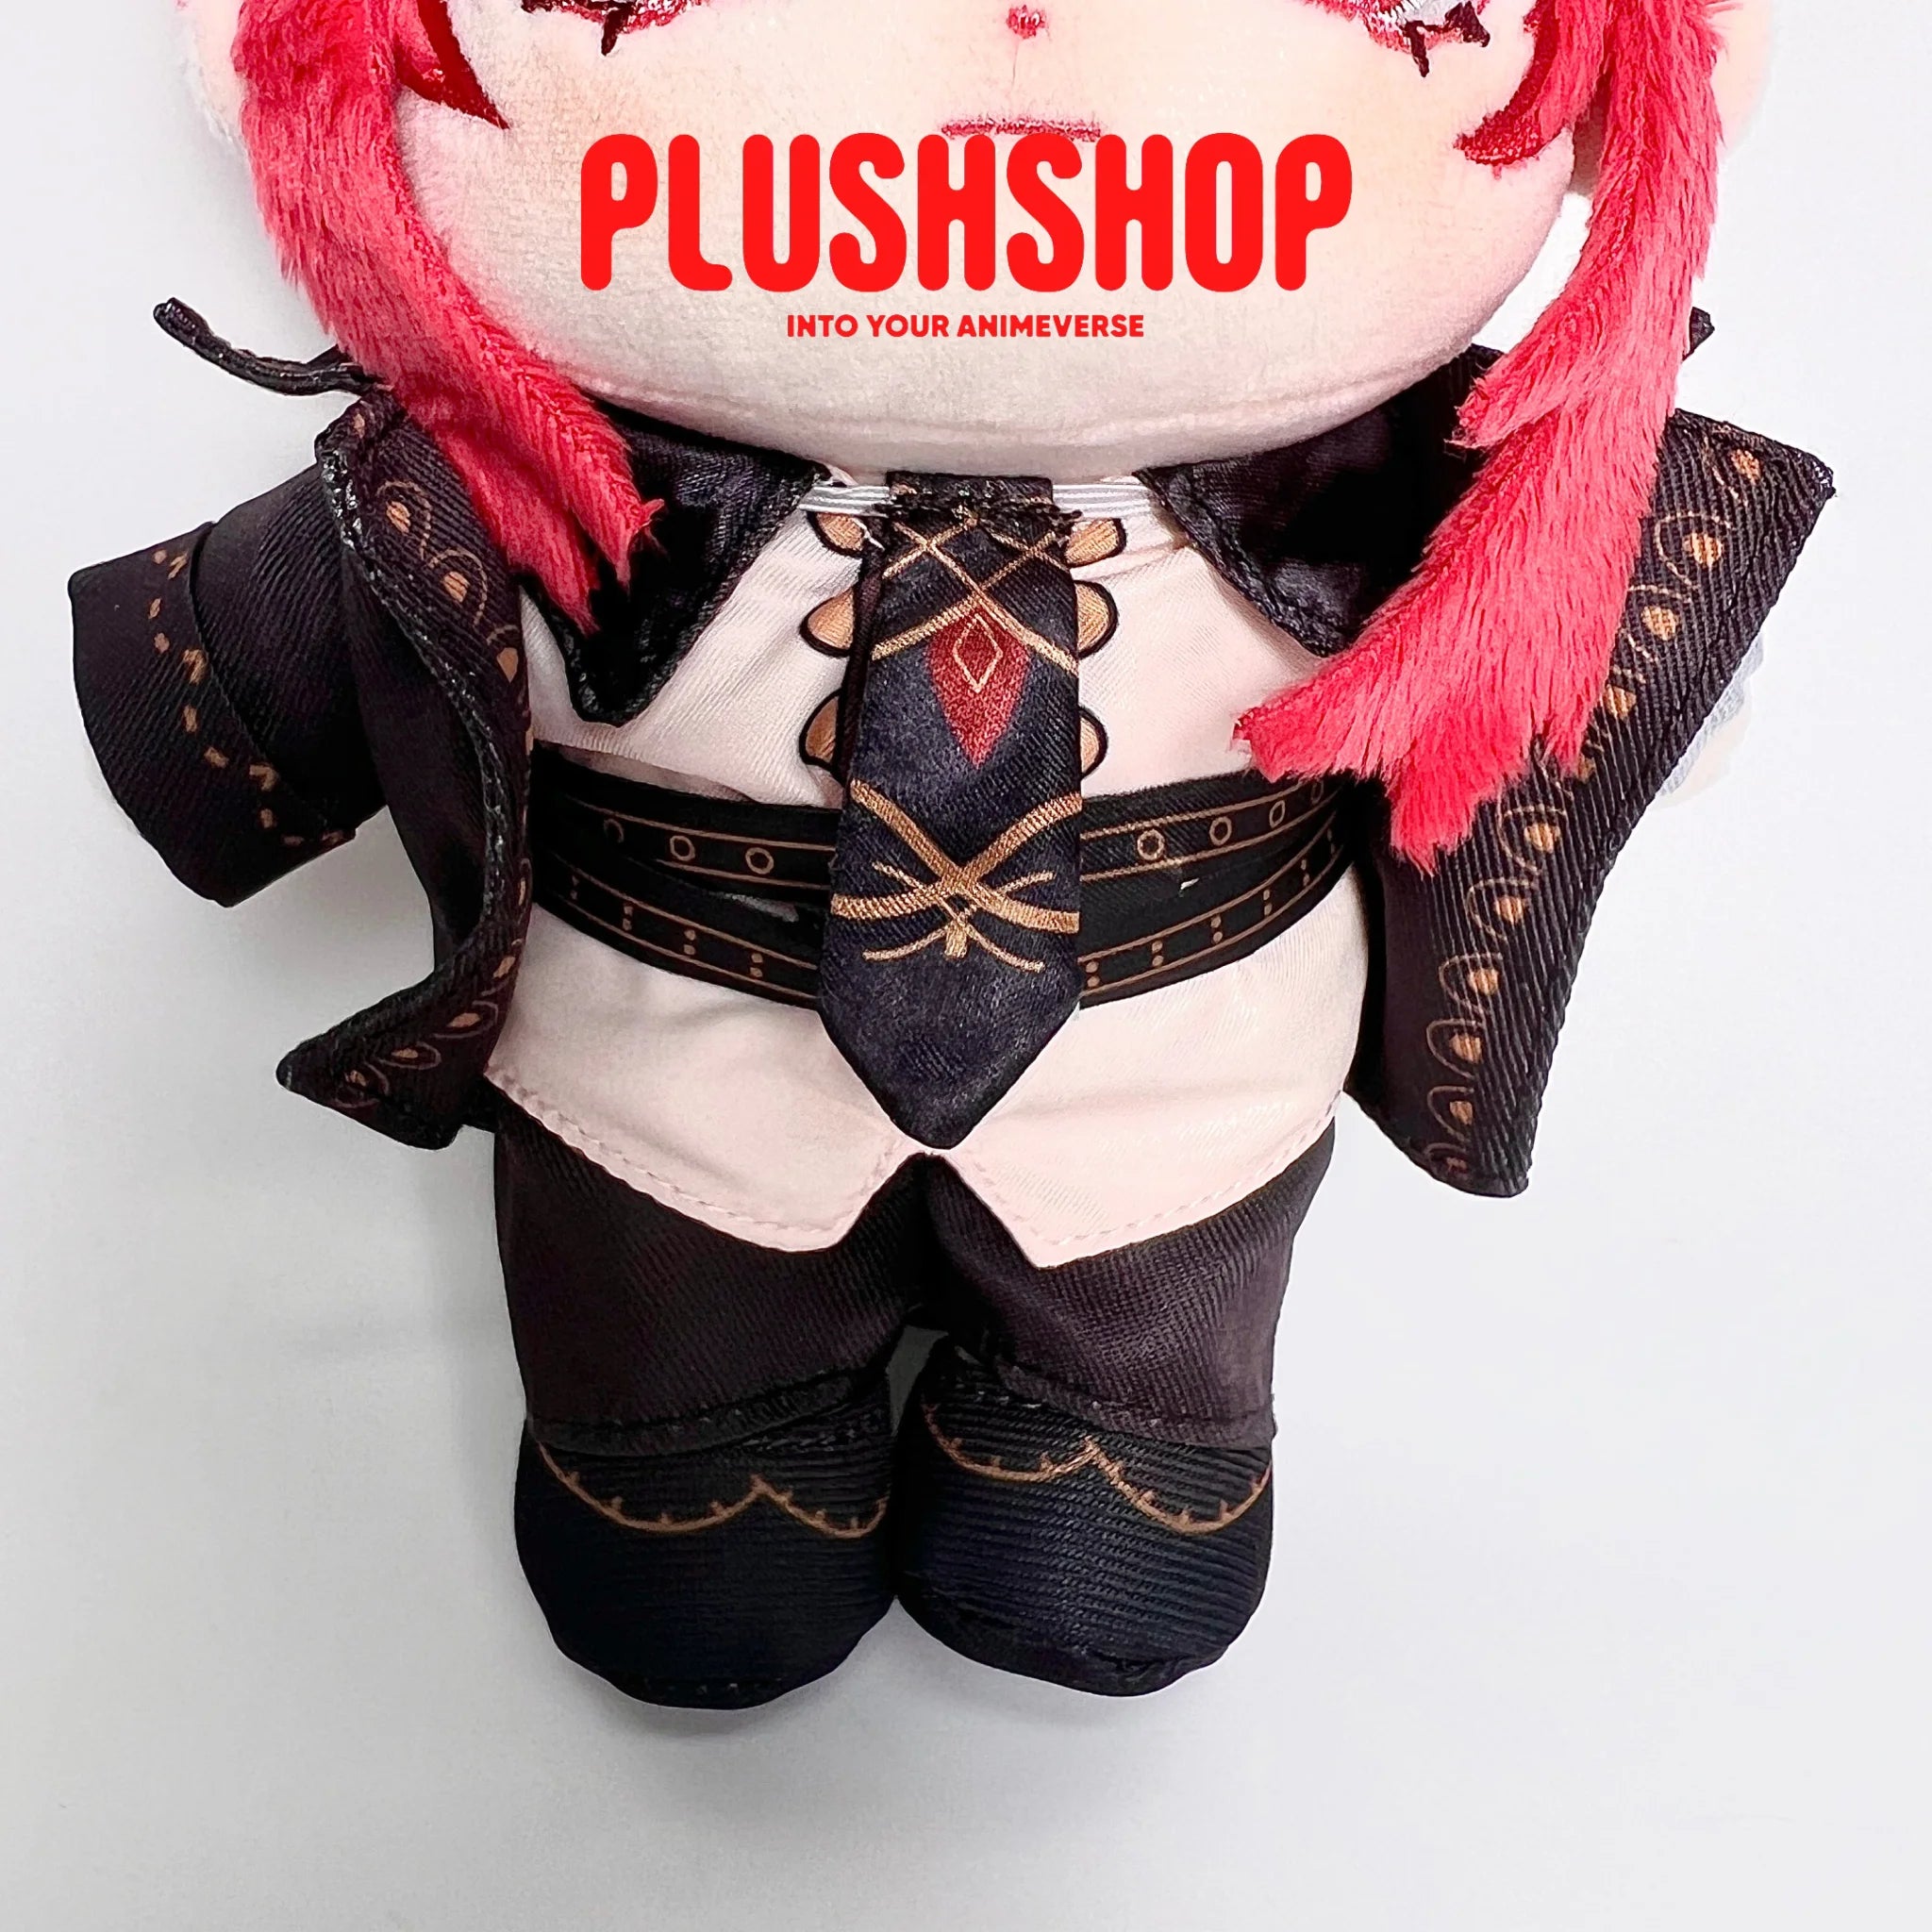 20Cm Genshin Impact Diluc Plush Cute Doll Outfit Changeable 玩偶